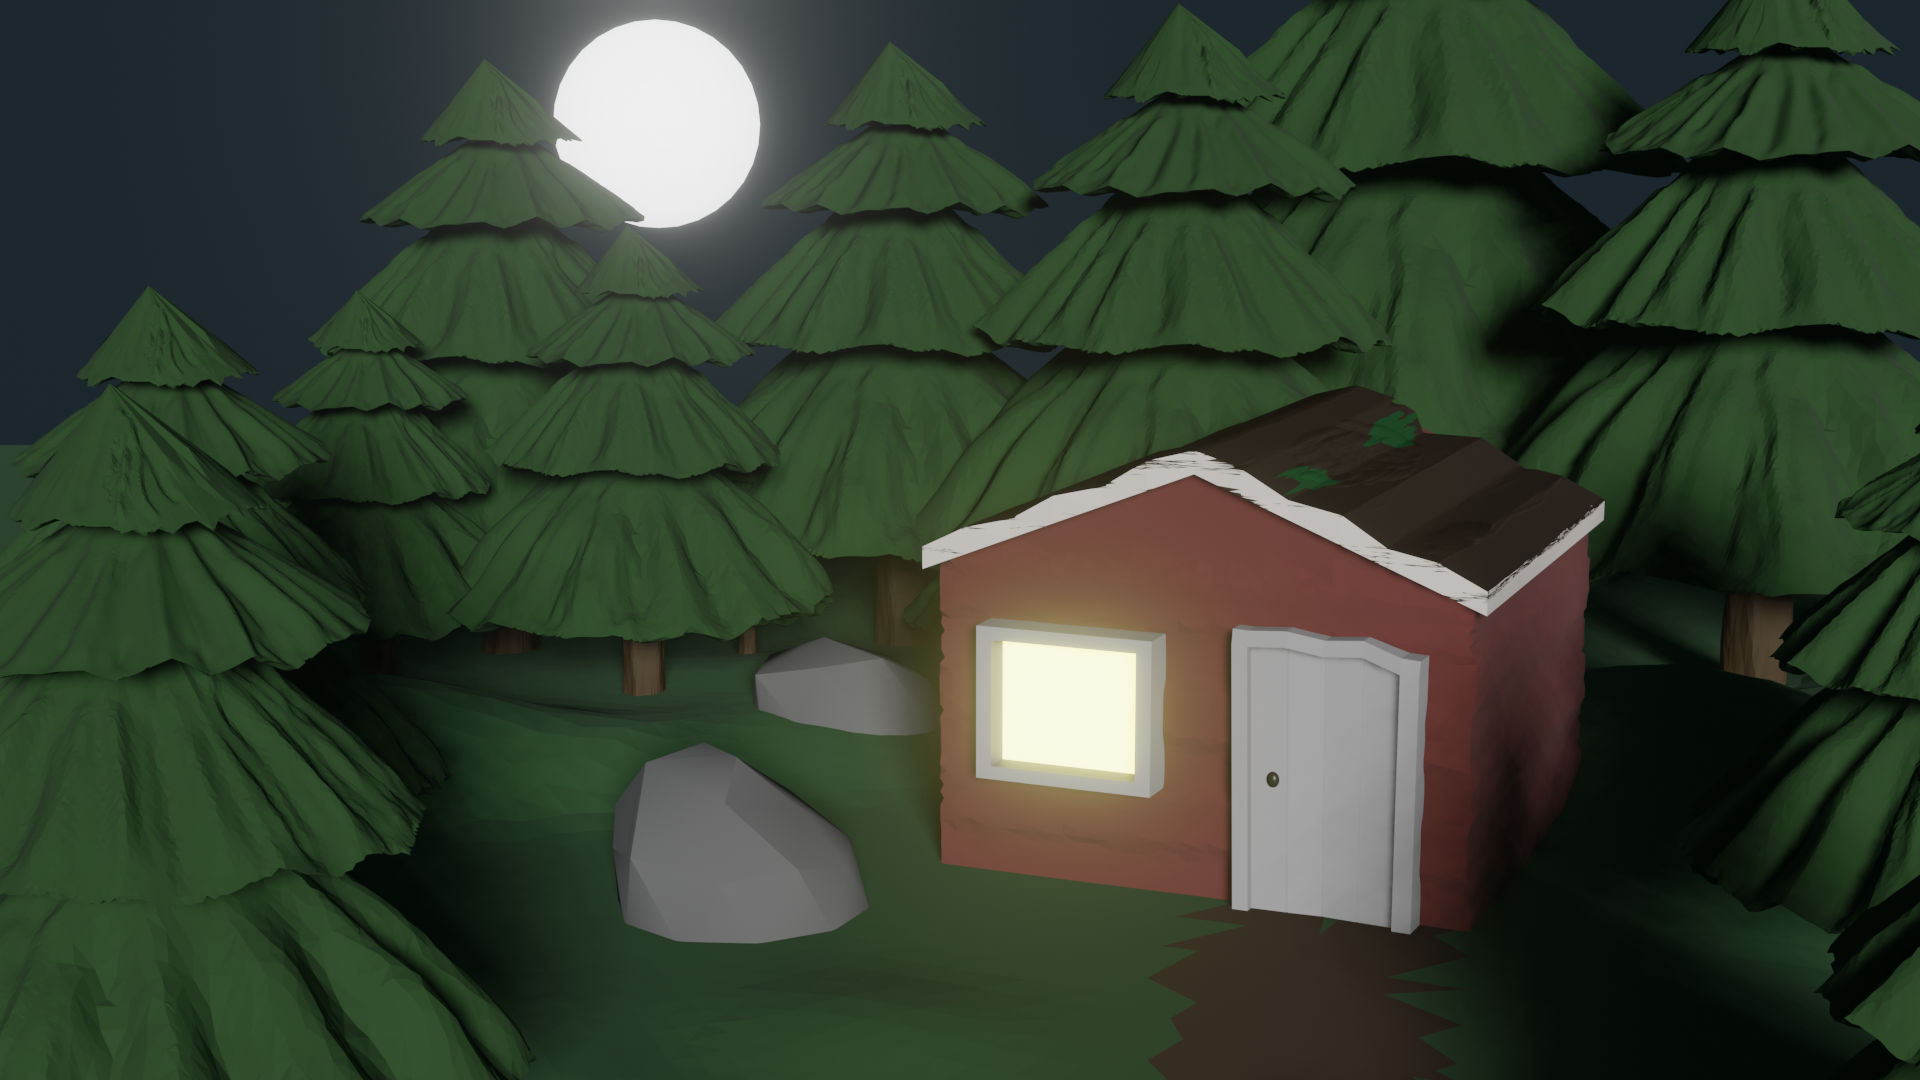 Low poly scene of a cabin in the woods